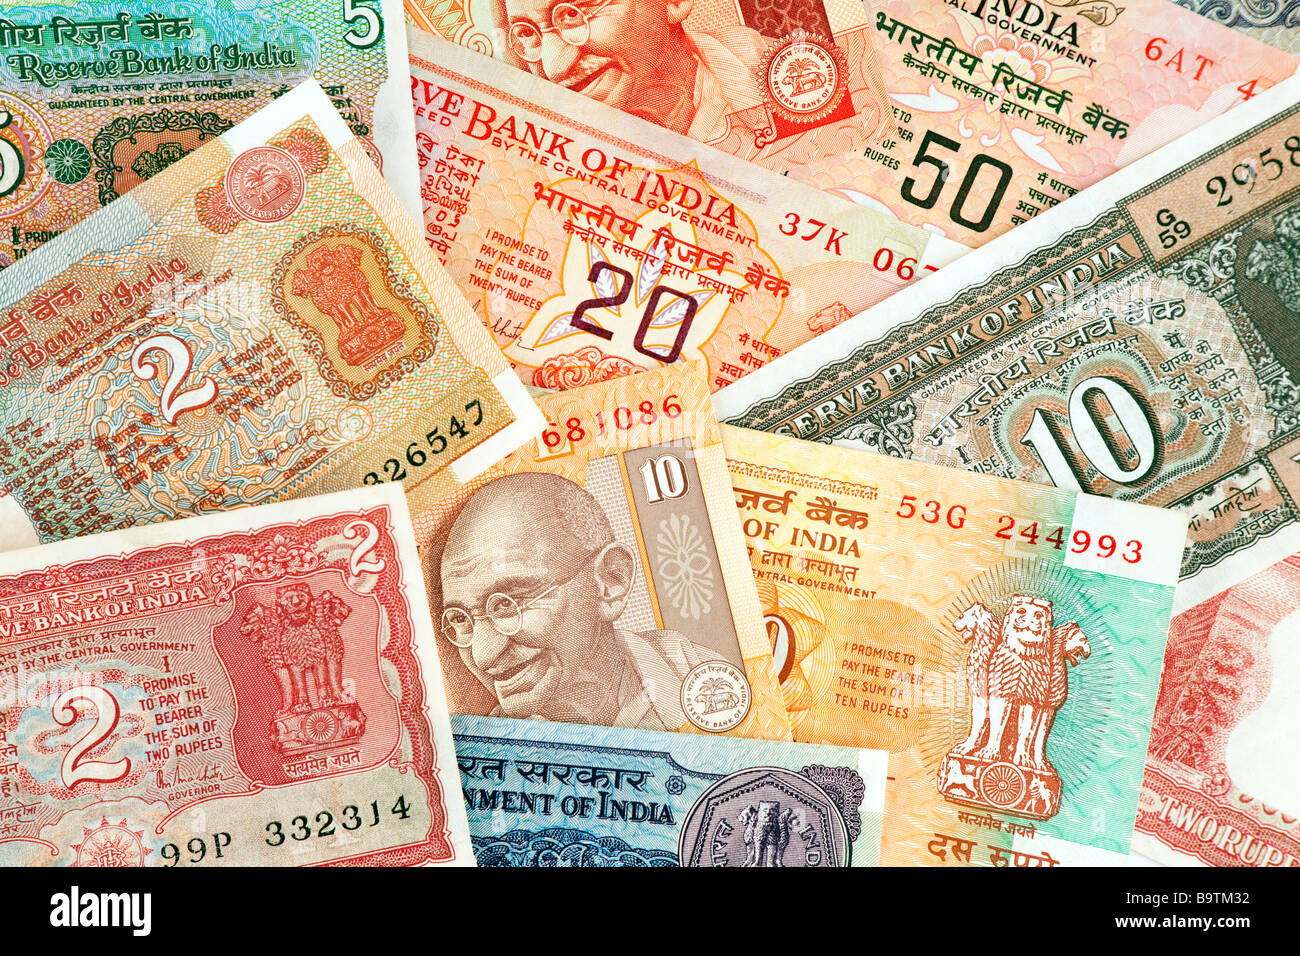 Money currency detail of Indian banknotes Stock Photo